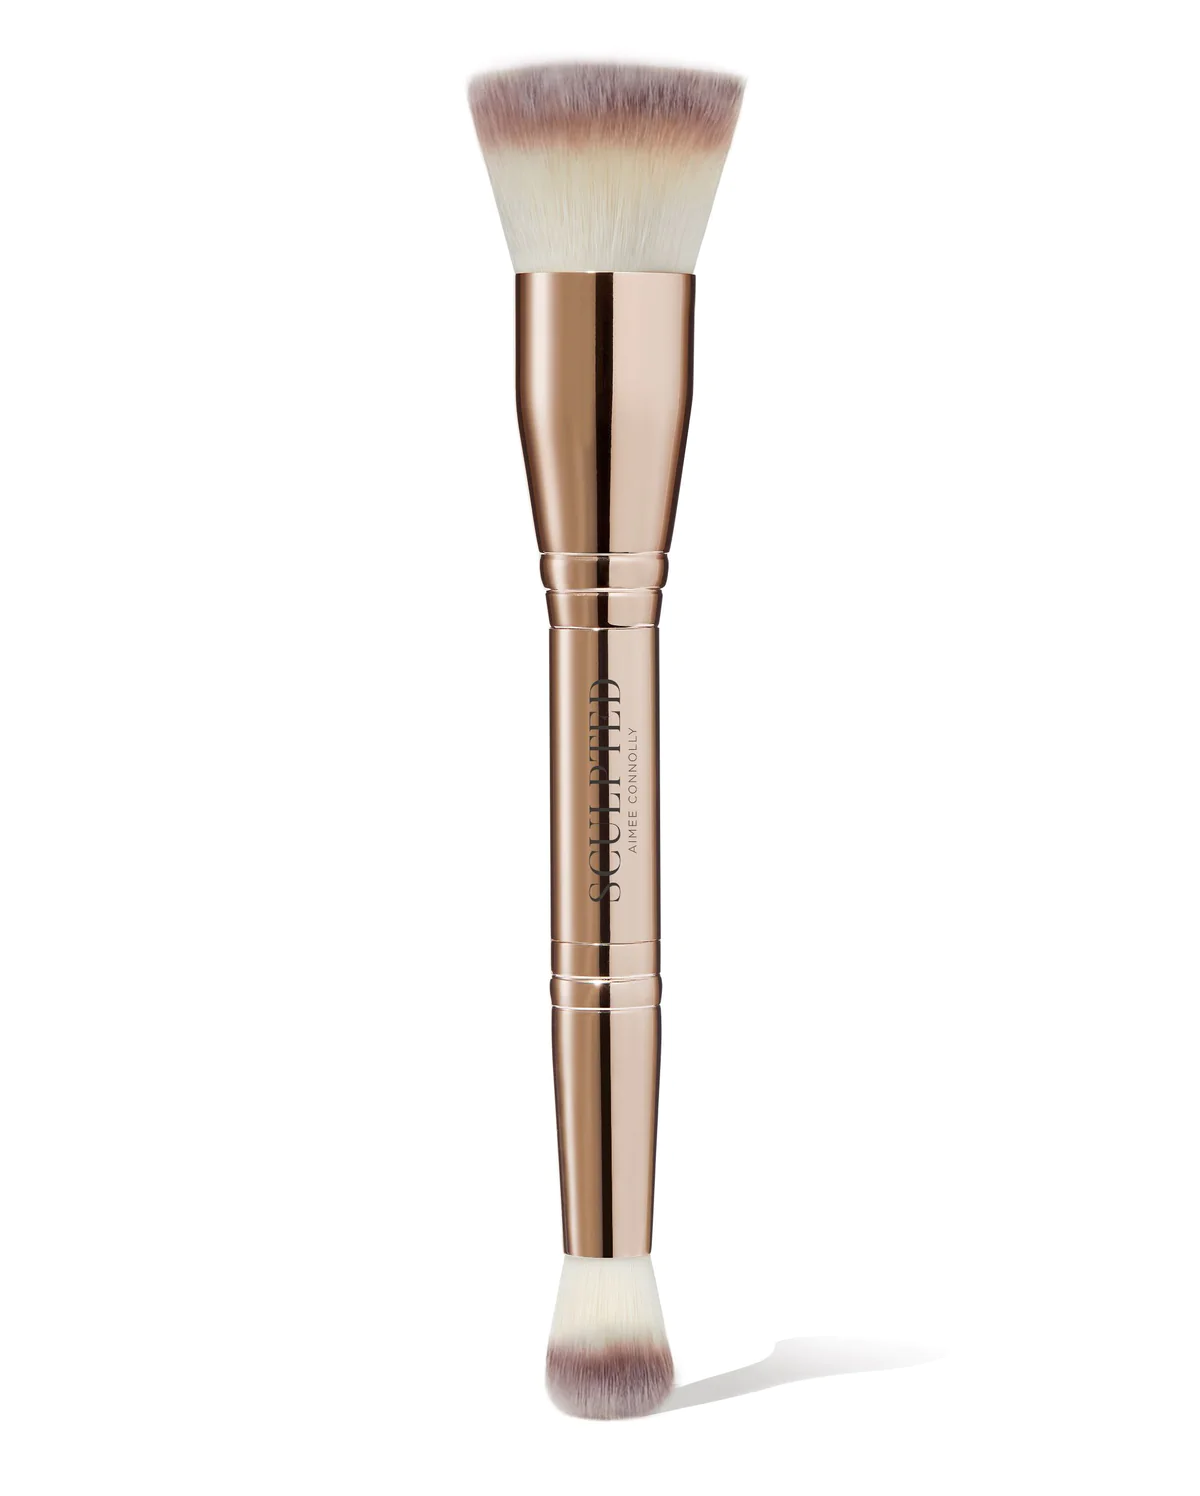 Sculpted By Aimee Connolly Stippling Duo Brush